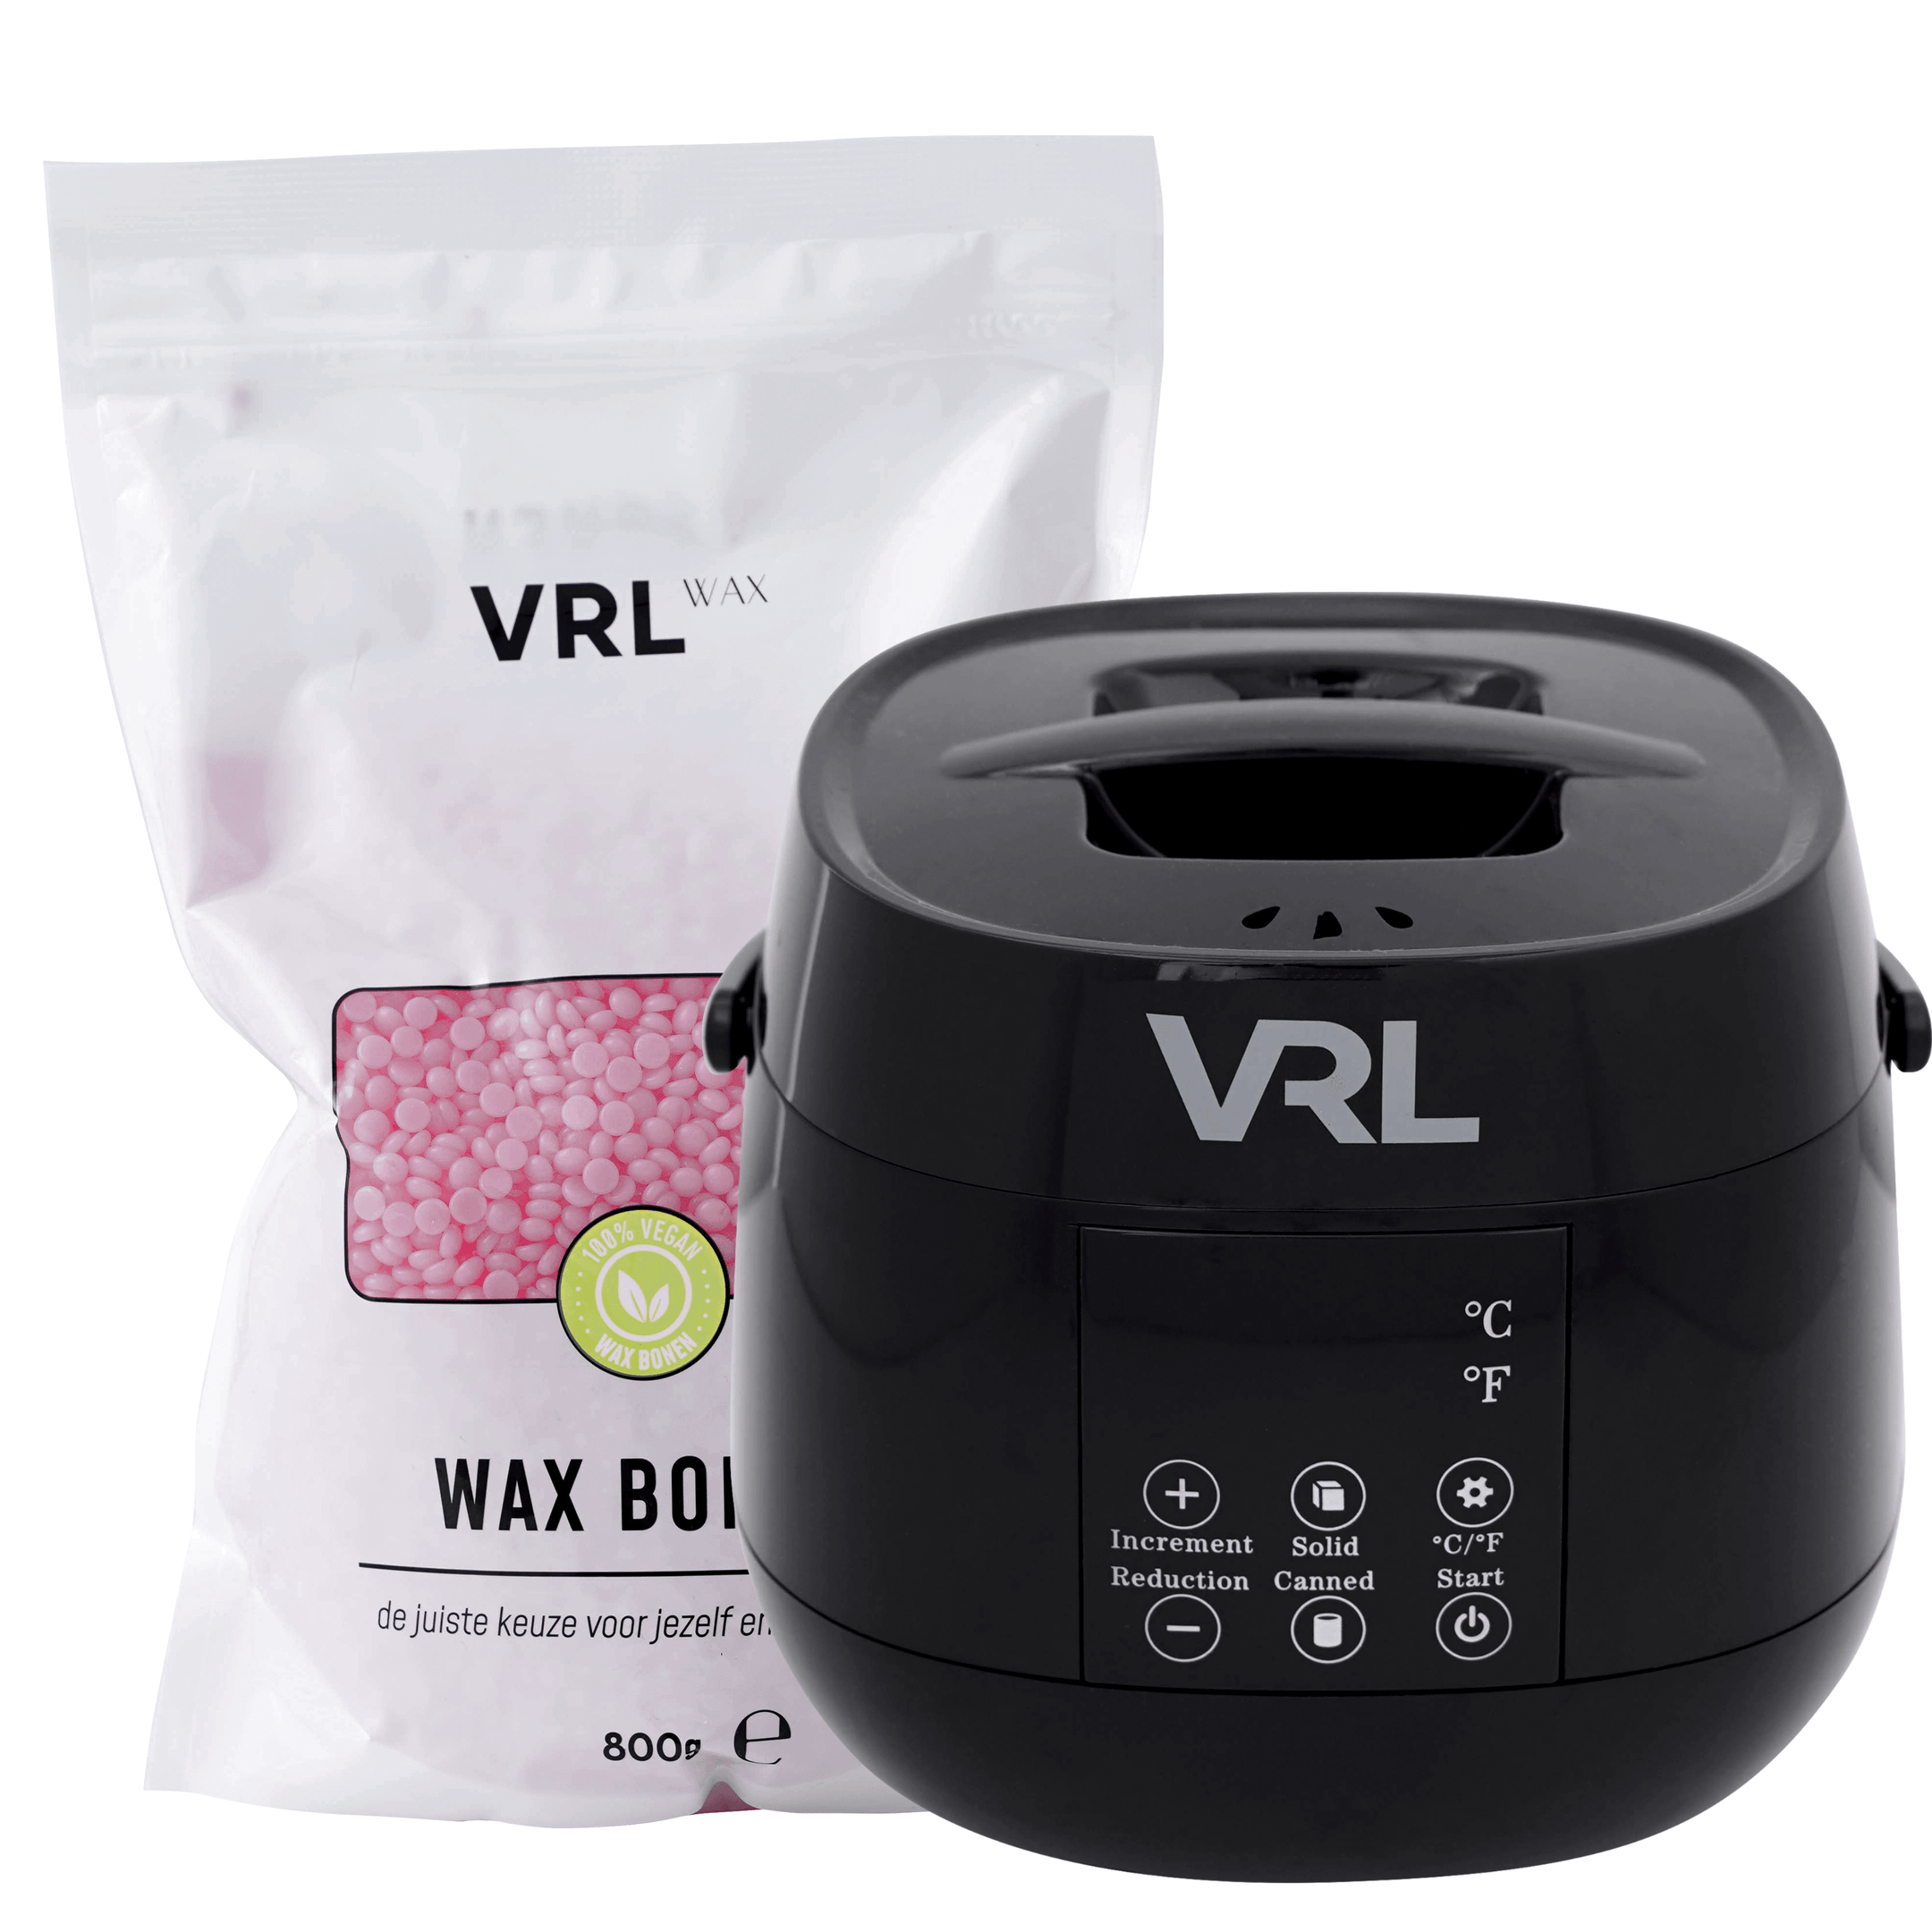 VRL Smart Wax Device - Complete with Orange Wax Beans